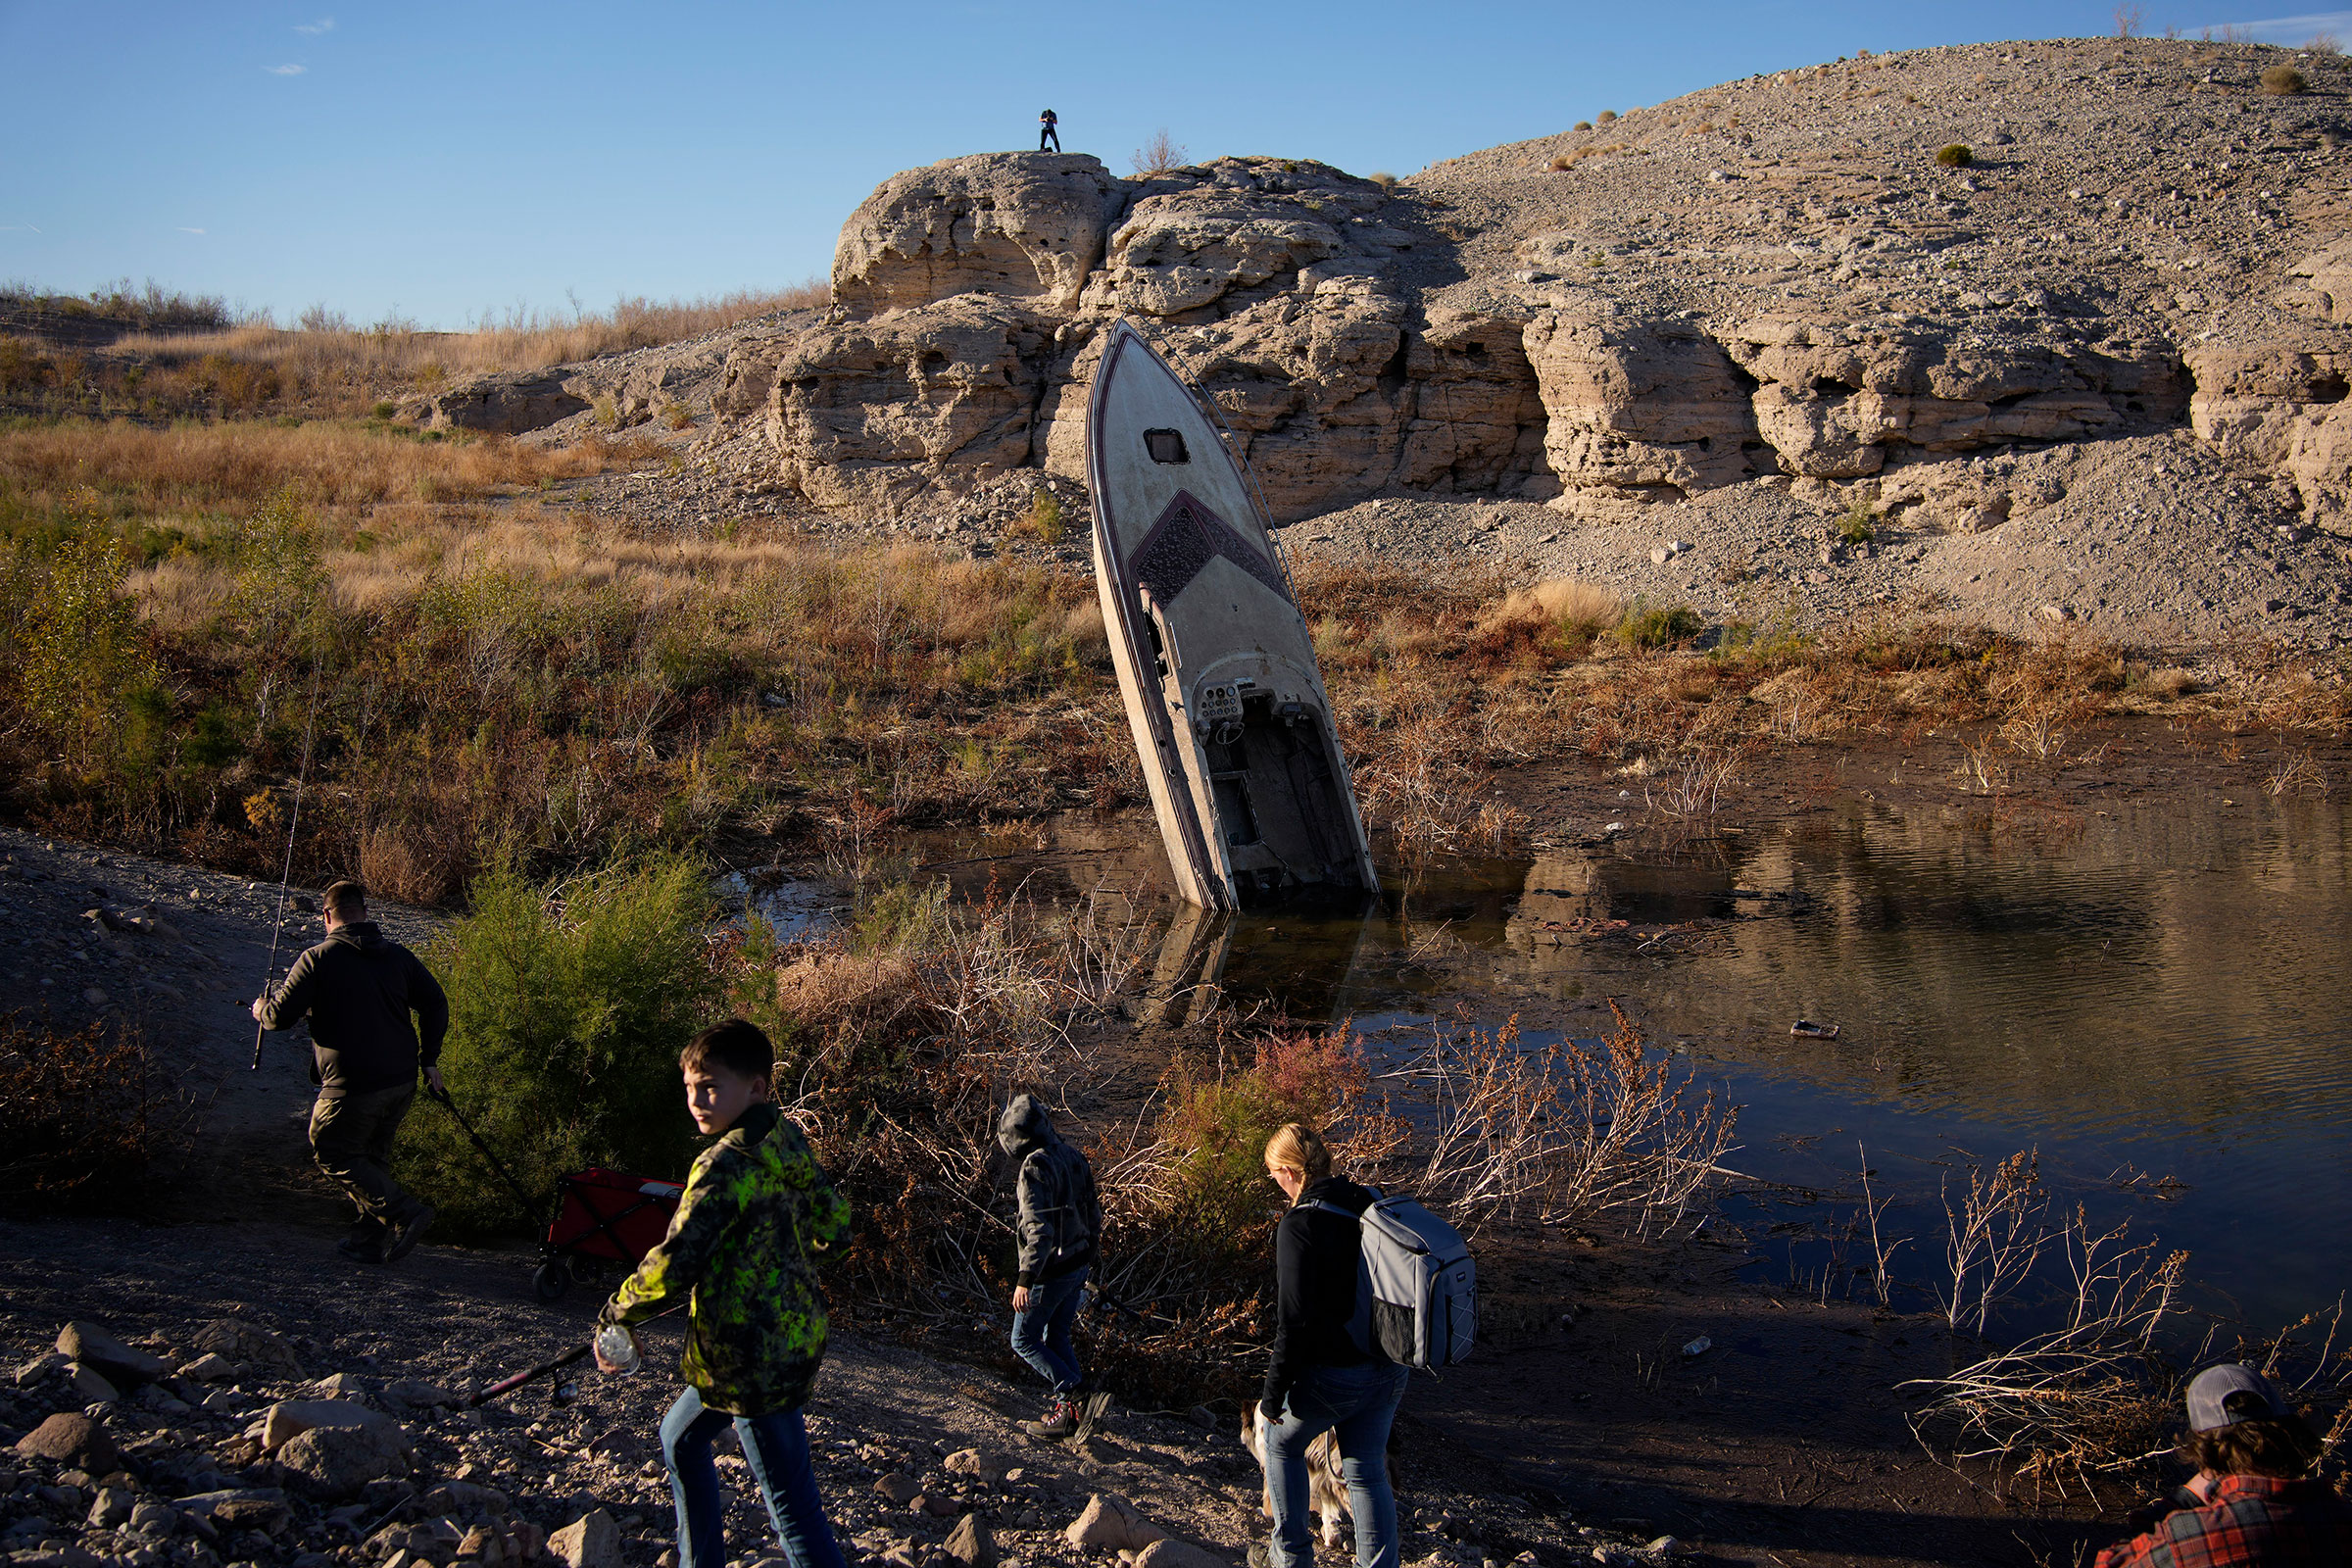 People walk by a formerly sunken boat standing upright into the air with its stern buried in the mud along the shoreline of Lake Mead at the Lake Mead National Recreation Area, Friday, Jan. 27, 2023, near Boulder City, Nev. (John Locher—AP)